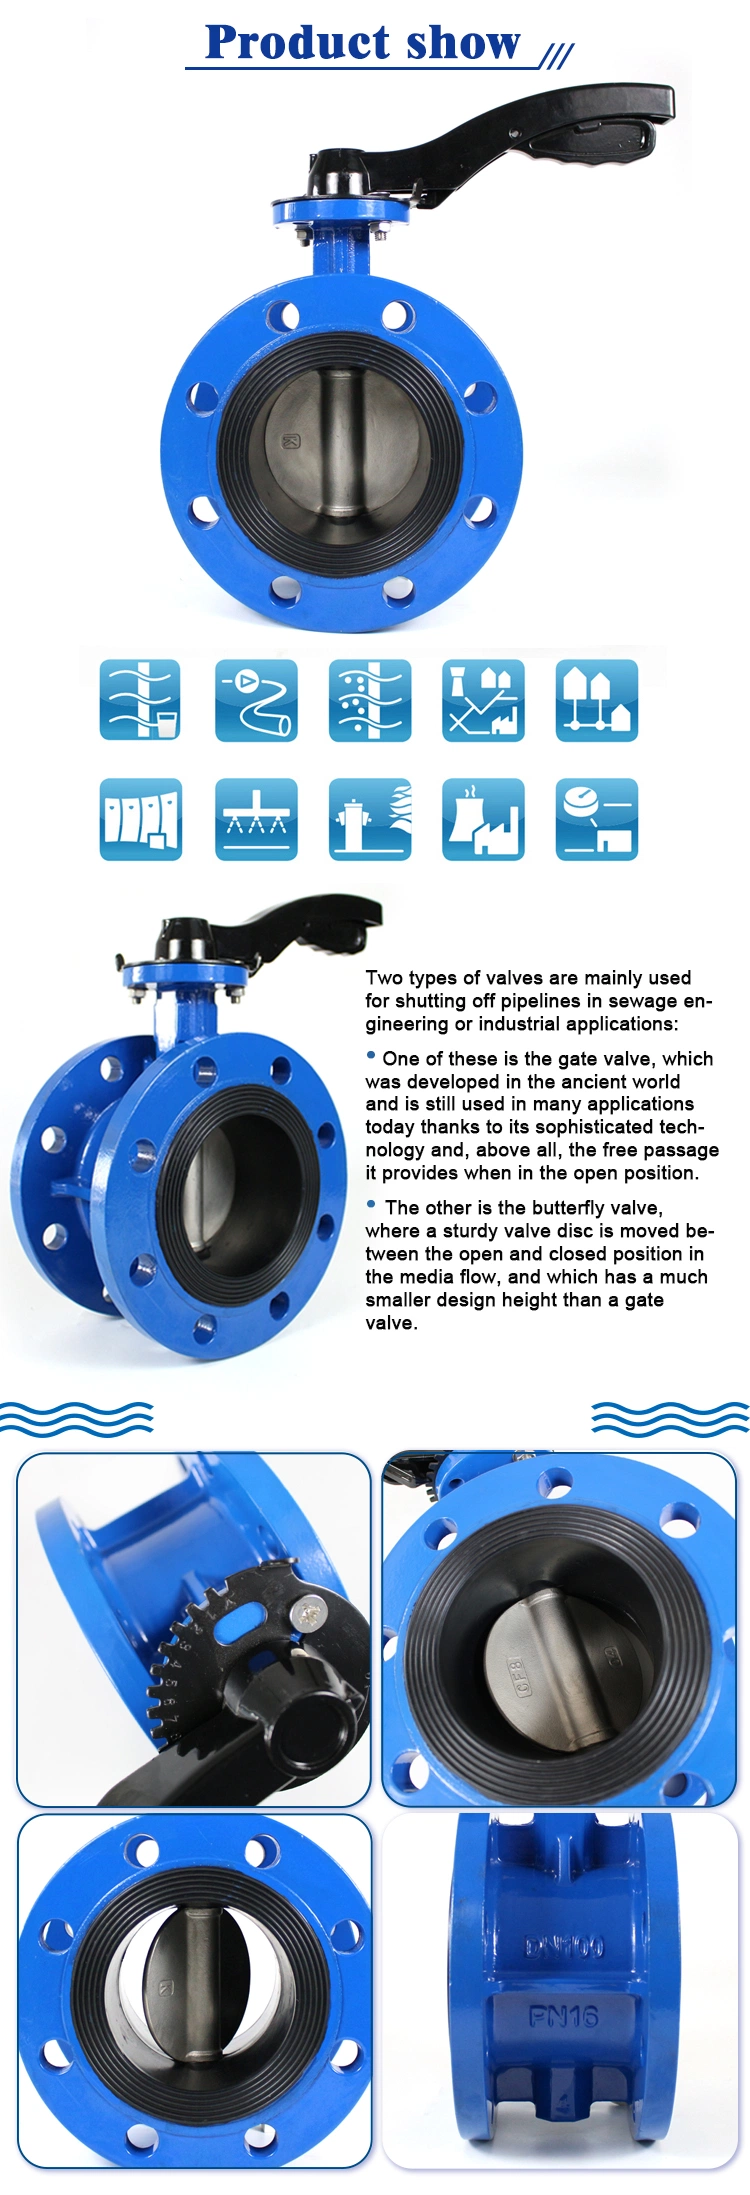 DIN BS ANSI Wcb Body EPDM Seated Wafer Butterfly/Lug Butterfly Valve/Electric Actuator Pneumatic Actuator Worm Gear Double Flange Butterfly Valve